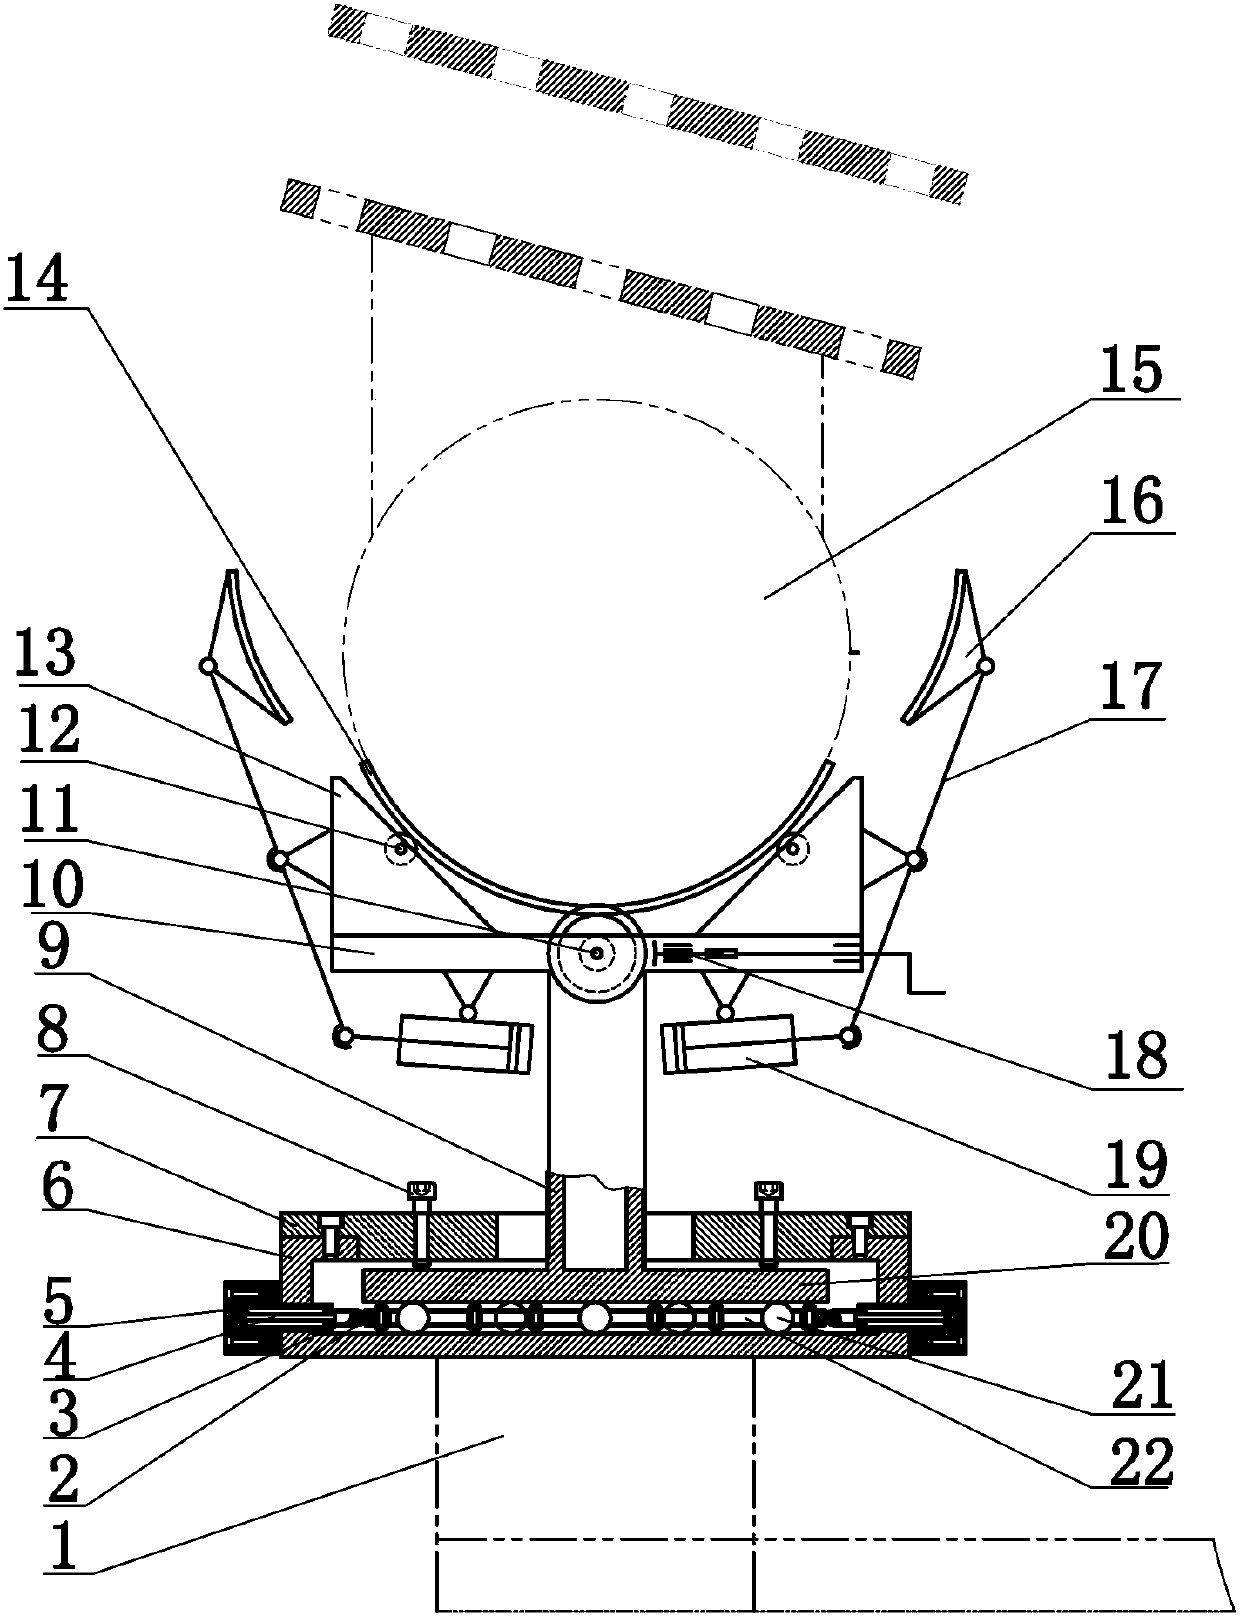 Ball type multidirectional fine-adjustment clamping and aligning device